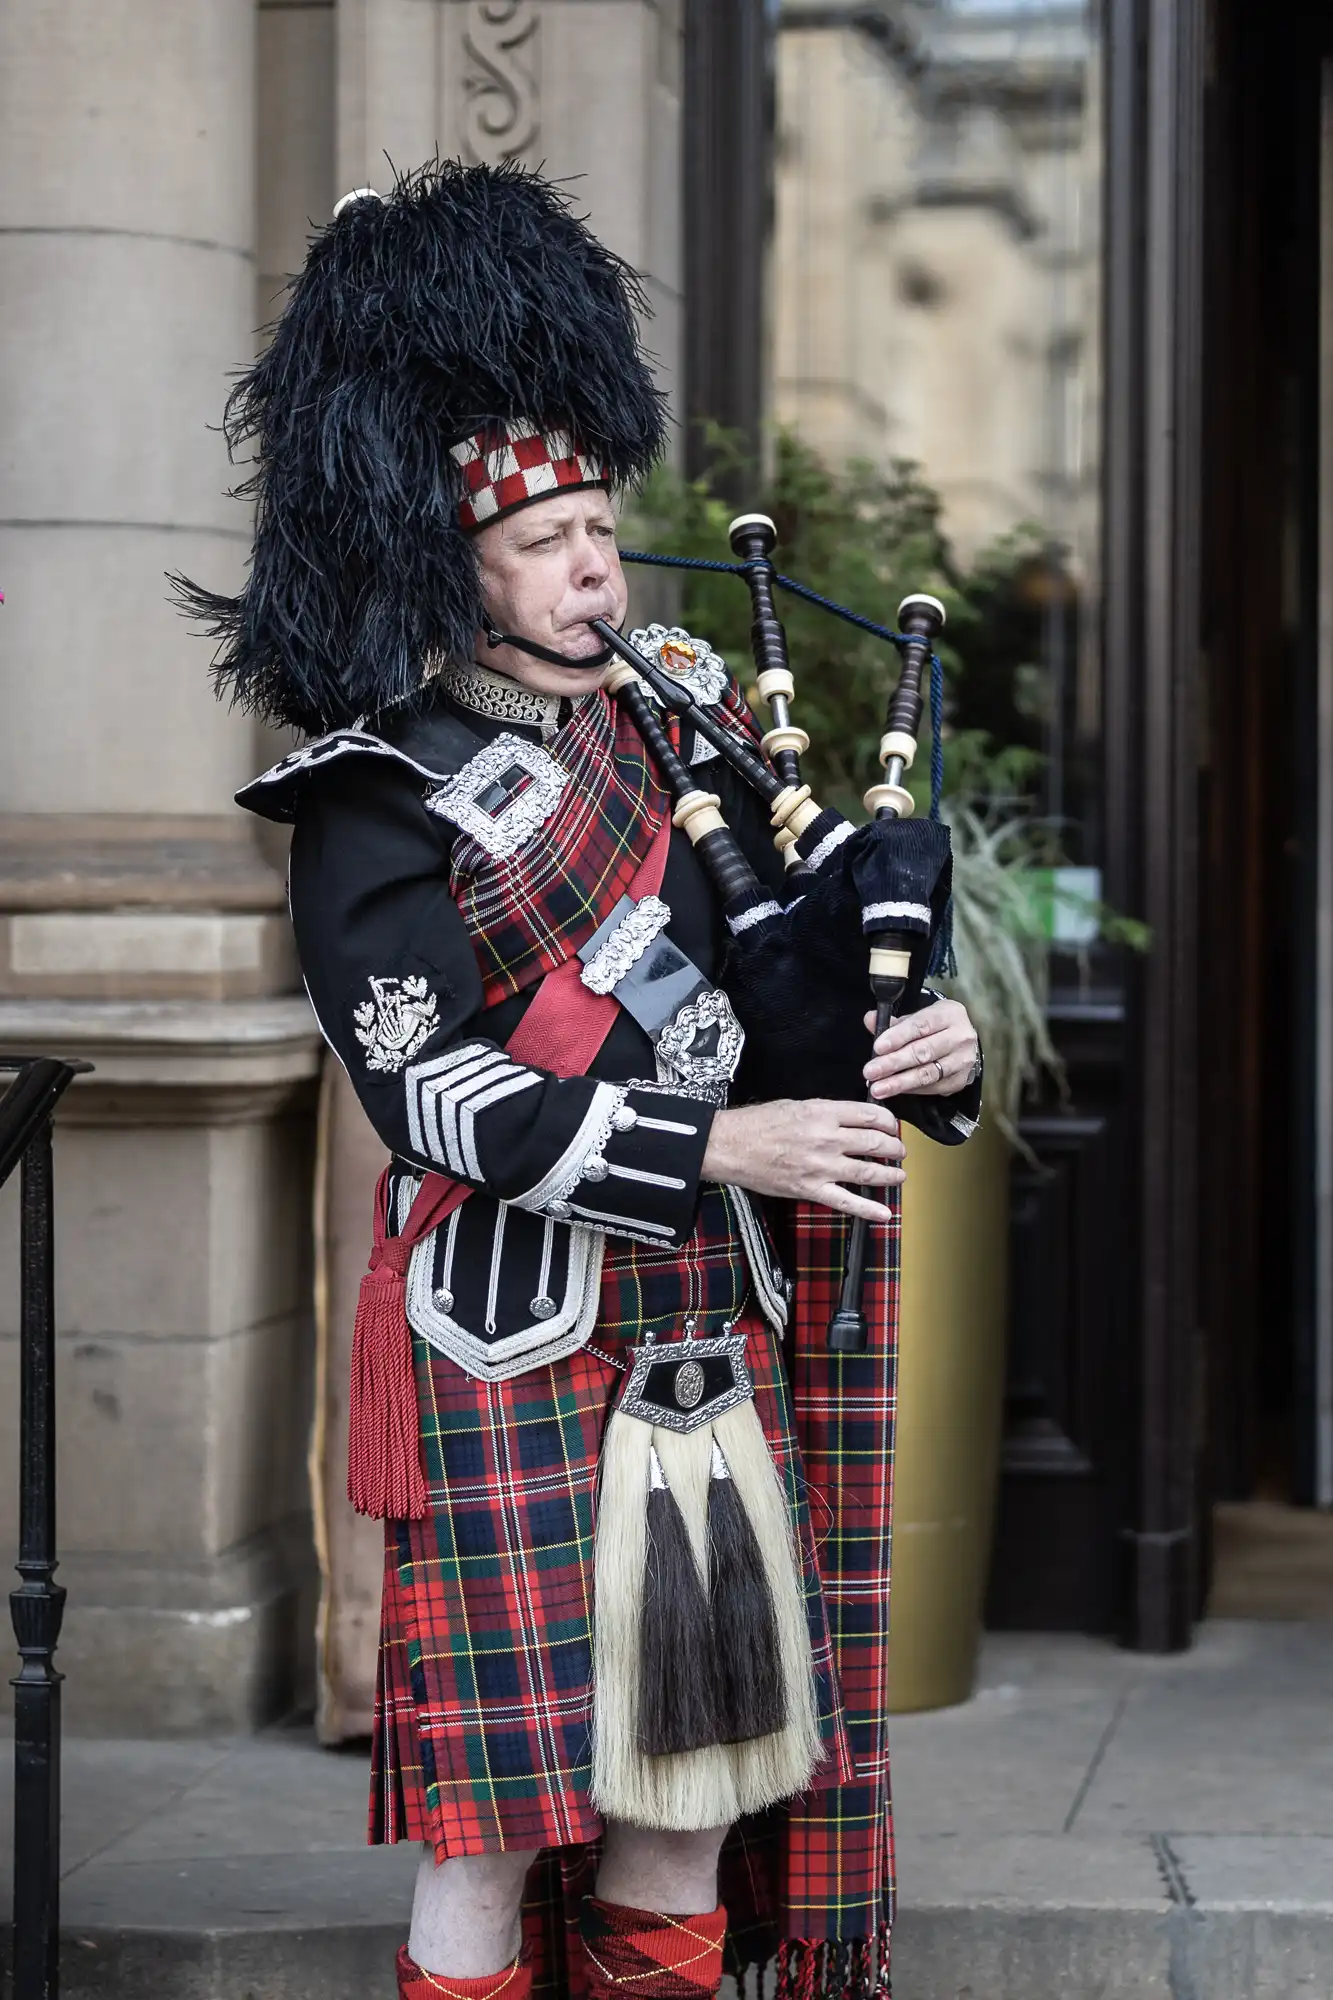 A bagpiper in traditional scottish attire, featuring a tartan kilt and a feathered bonnet, plays the bagpipes on a city street.